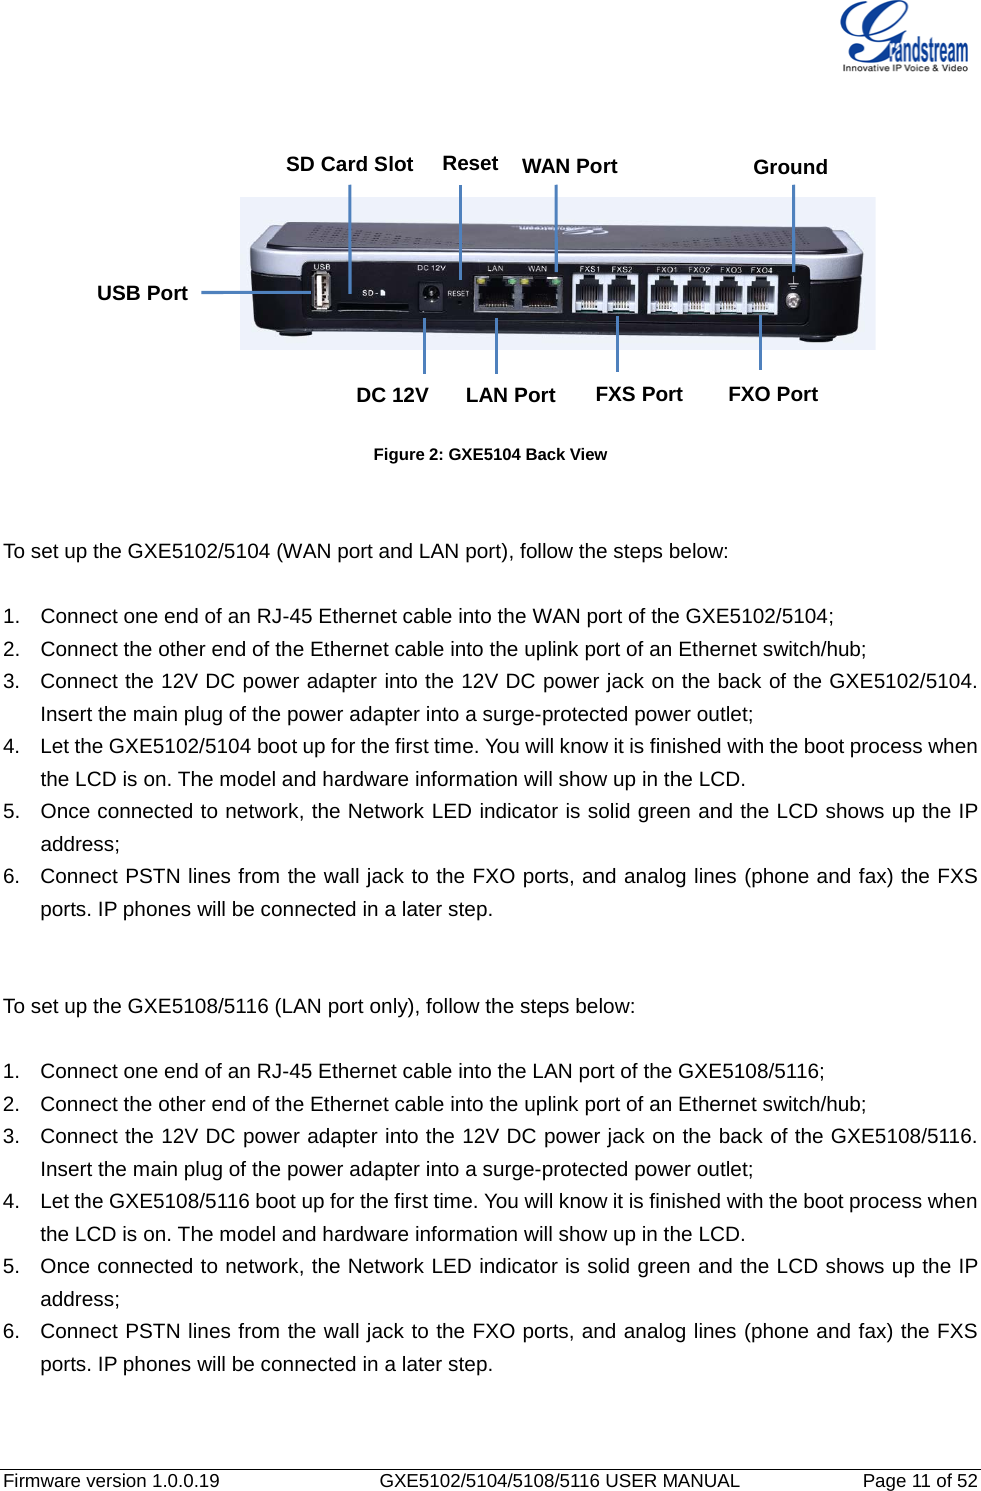   Firmware version 1.0.0.19                   GXE5102/5104/5108/5116 USER MANUAL              Page 11 of 52                                Figure 2: GXE5104 Back View   To set up the GXE5102/5104 (WAN port and LAN port), follow the steps below:  1. Connect one end of an RJ-45 Ethernet cable into the WAN port of the GXE5102/5104; 2. Connect the other end of the Ethernet cable into the uplink port of an Ethernet switch/hub; 3. Connect the 12V DC power adapter into the 12V DC power jack on the back of the GXE5102/5104. Insert the main plug of the power adapter into a surge-protected power outlet; 4. Let the GXE5102/5104 boot up for the first time. You will know it is finished with the boot process when the LCD is on. The model and hardware information will show up in the LCD. 5. Once connected to network, the Network LED indicator is solid green and the LCD shows up the IP address; 6. Connect PSTN lines from the wall jack to the FXO ports, and analog lines (phone and fax) the FXS ports. IP phones will be connected in a later step.   To set up the GXE5108/5116 (LAN port only), follow the steps below:  1. Connect one end of an RJ-45 Ethernet cable into the LAN port of the GXE5108/5116; 2. Connect the other end of the Ethernet cable into the uplink port of an Ethernet switch/hub; 3. Connect the 12V DC power adapter into the 12V DC power jack on the back of the GXE5108/5116. Insert the main plug of the power adapter into a surge-protected power outlet; 4. Let the GXE5108/5116 boot up for the first time. You will know it is finished with the boot process when the LCD is on. The model and hardware information will show up in the LCD. 5. Once connected to network, the Network LED indicator is solid green and the LCD shows up the IP address; 6. Connect PSTN lines from the wall jack to the FXO ports, and analog lines (phone and fax) the FXS ports. IP phones will be connected in a later step.  WAN Port Reset LAN Port USB Port SD Card Slot  DC 12V  FXS Port FXO Port Ground 